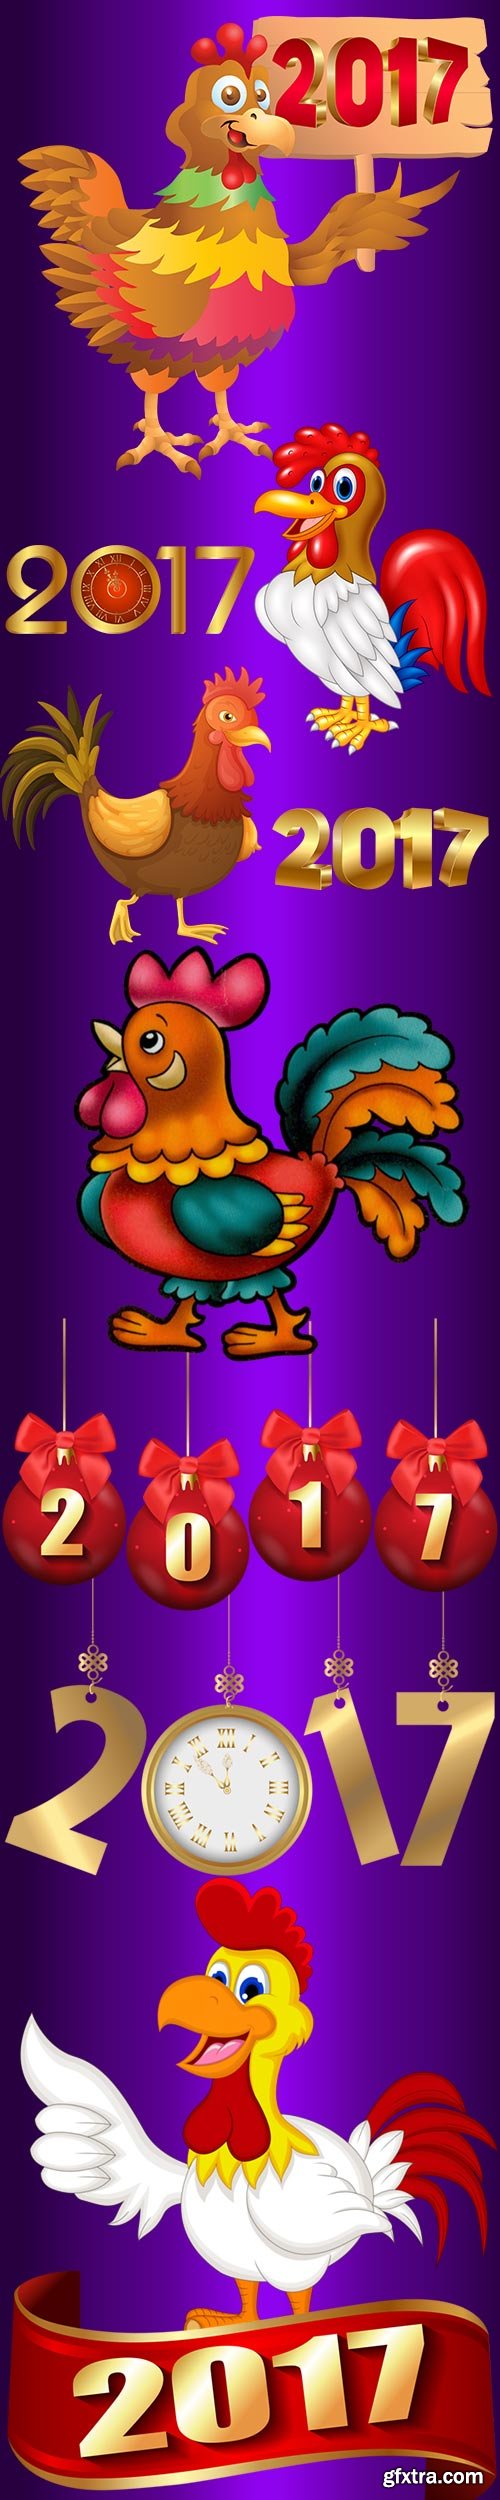 The symbol of the new year 2017 rooster